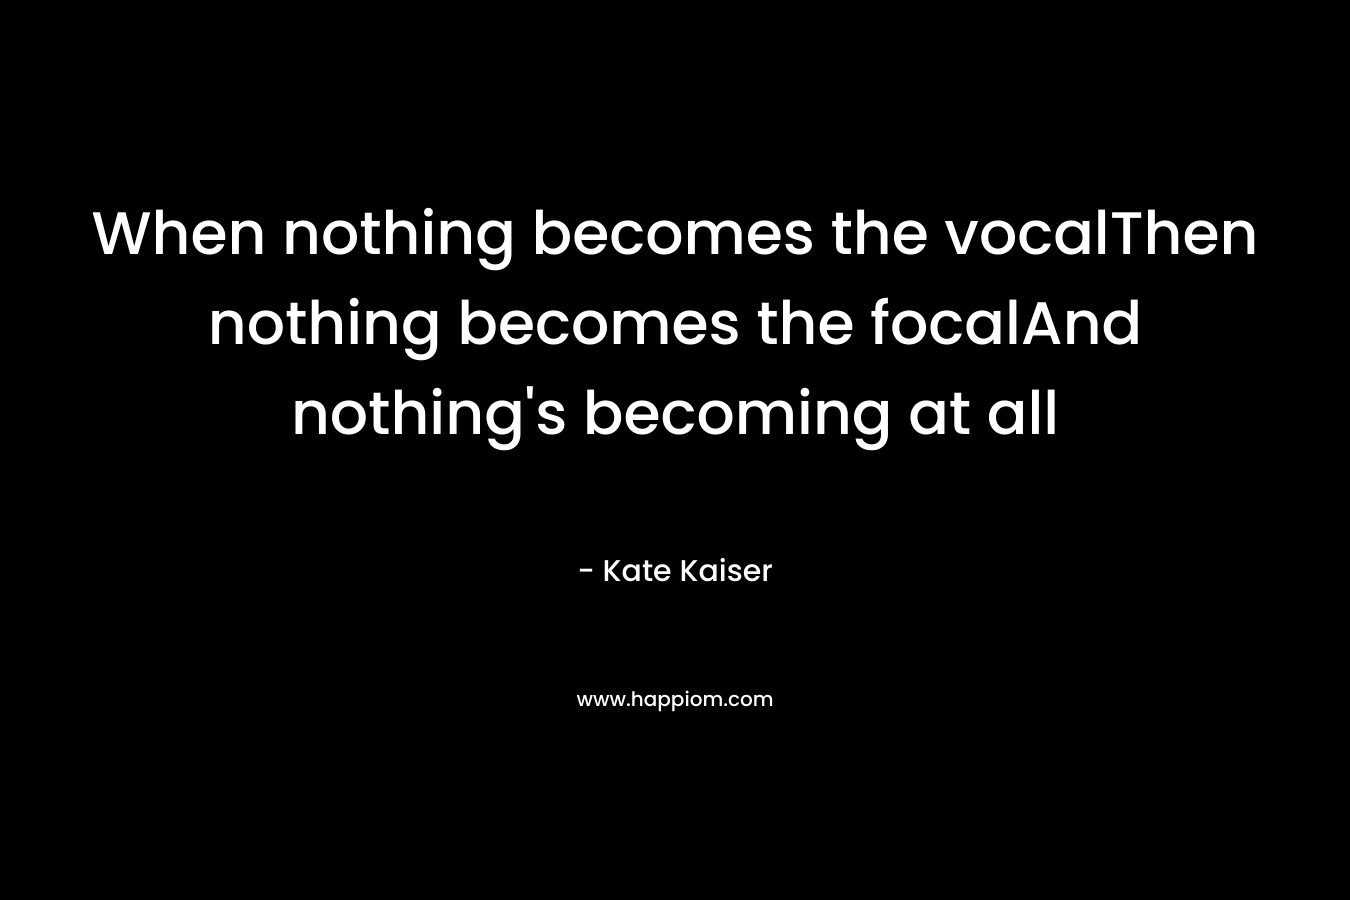 When nothing becomes the vocalThen nothing becomes the focalAnd nothing’s becoming at all – Kate Kaiser